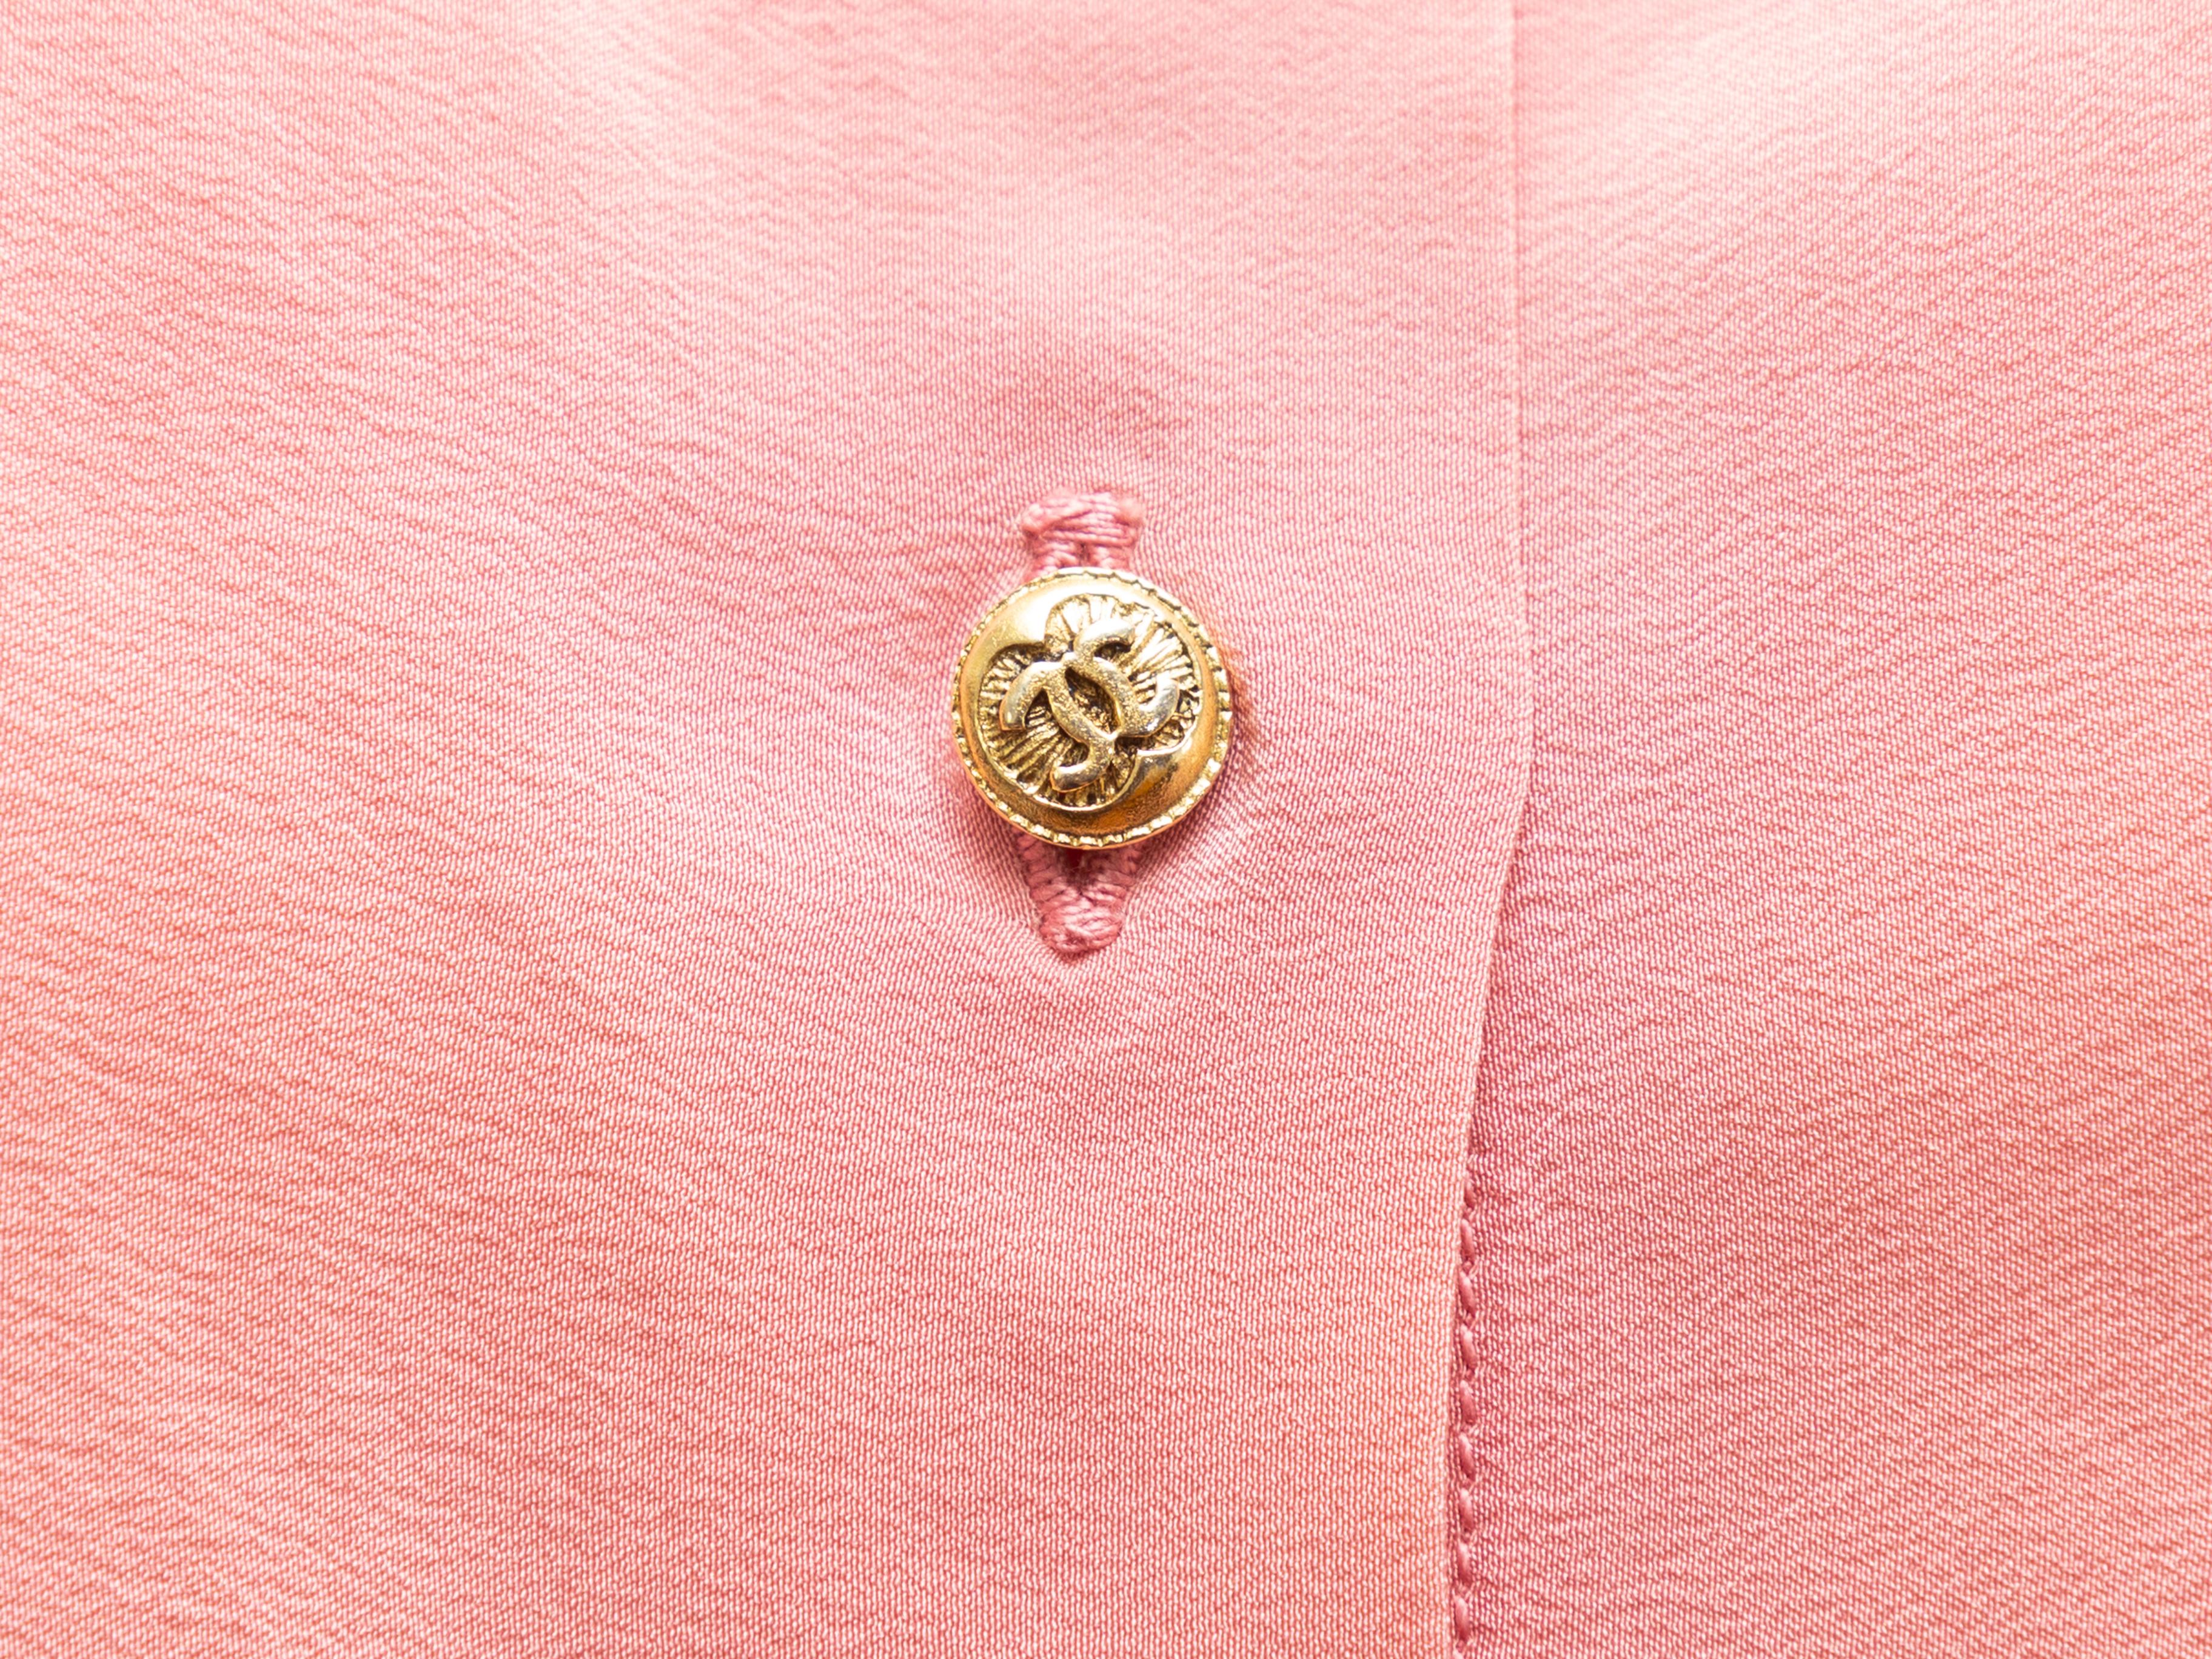 Product details: Vintage pink sleeveless top by Chanel. Pointed collar. Gold-tone CC button closures at center front. 30